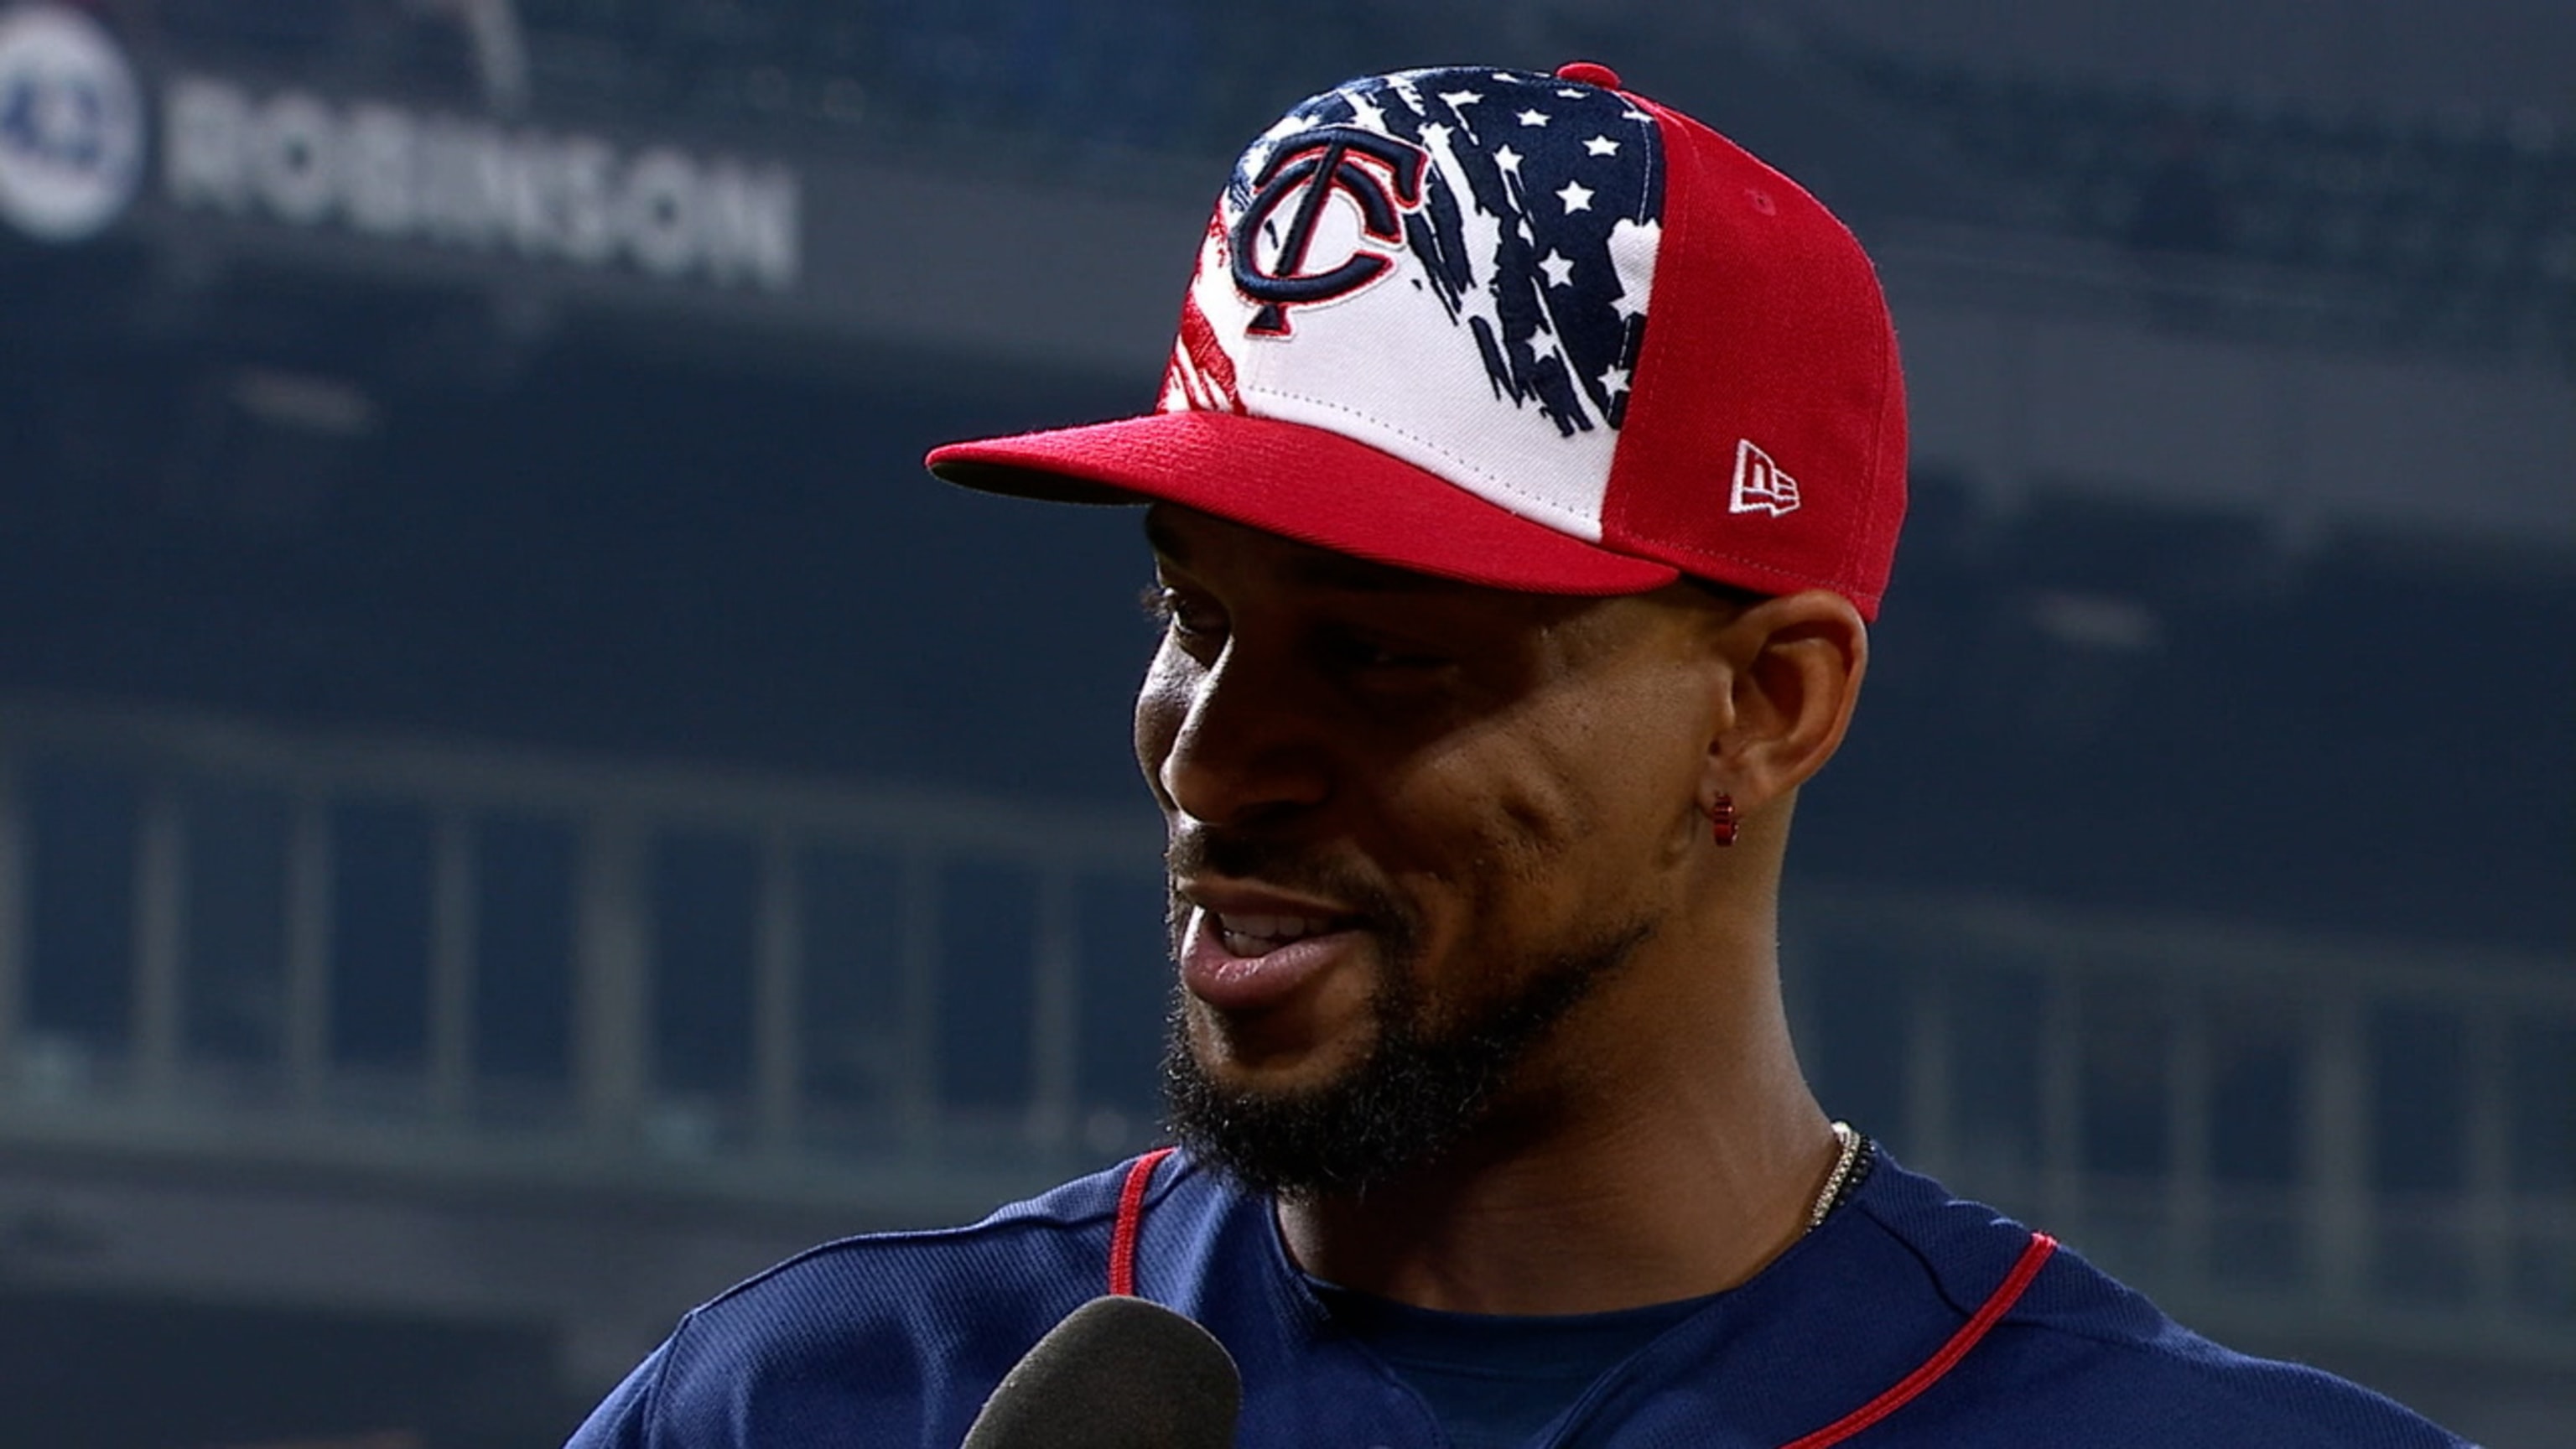 MLB on FOX - WHAT A GAME for Minnesota Twins OF Byron Buxton 👏🔥